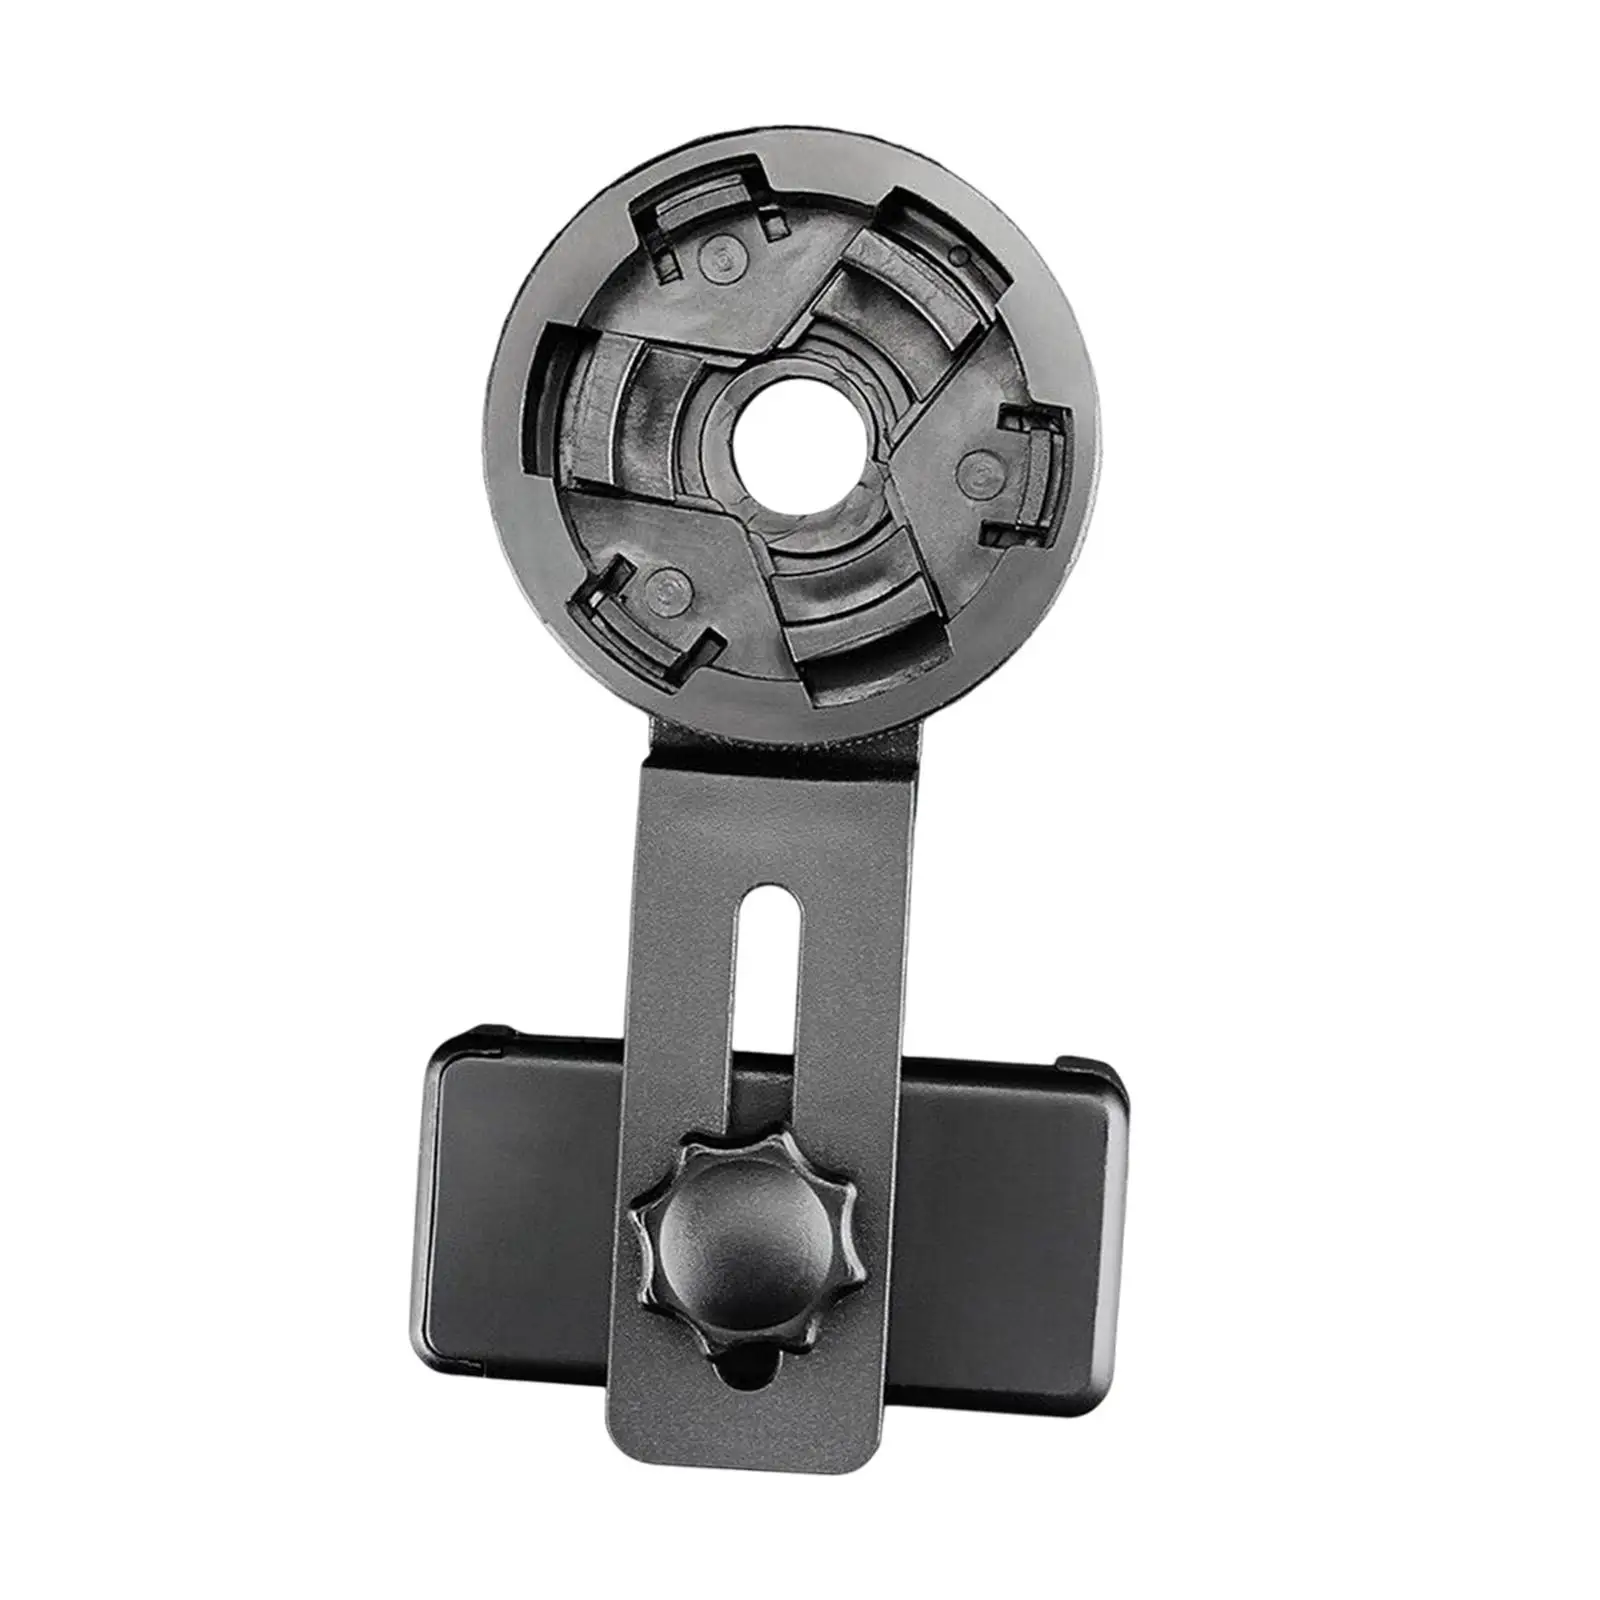 Cellphone Telescope Adapter Mount Bracket for Fits Almost All Smartphones